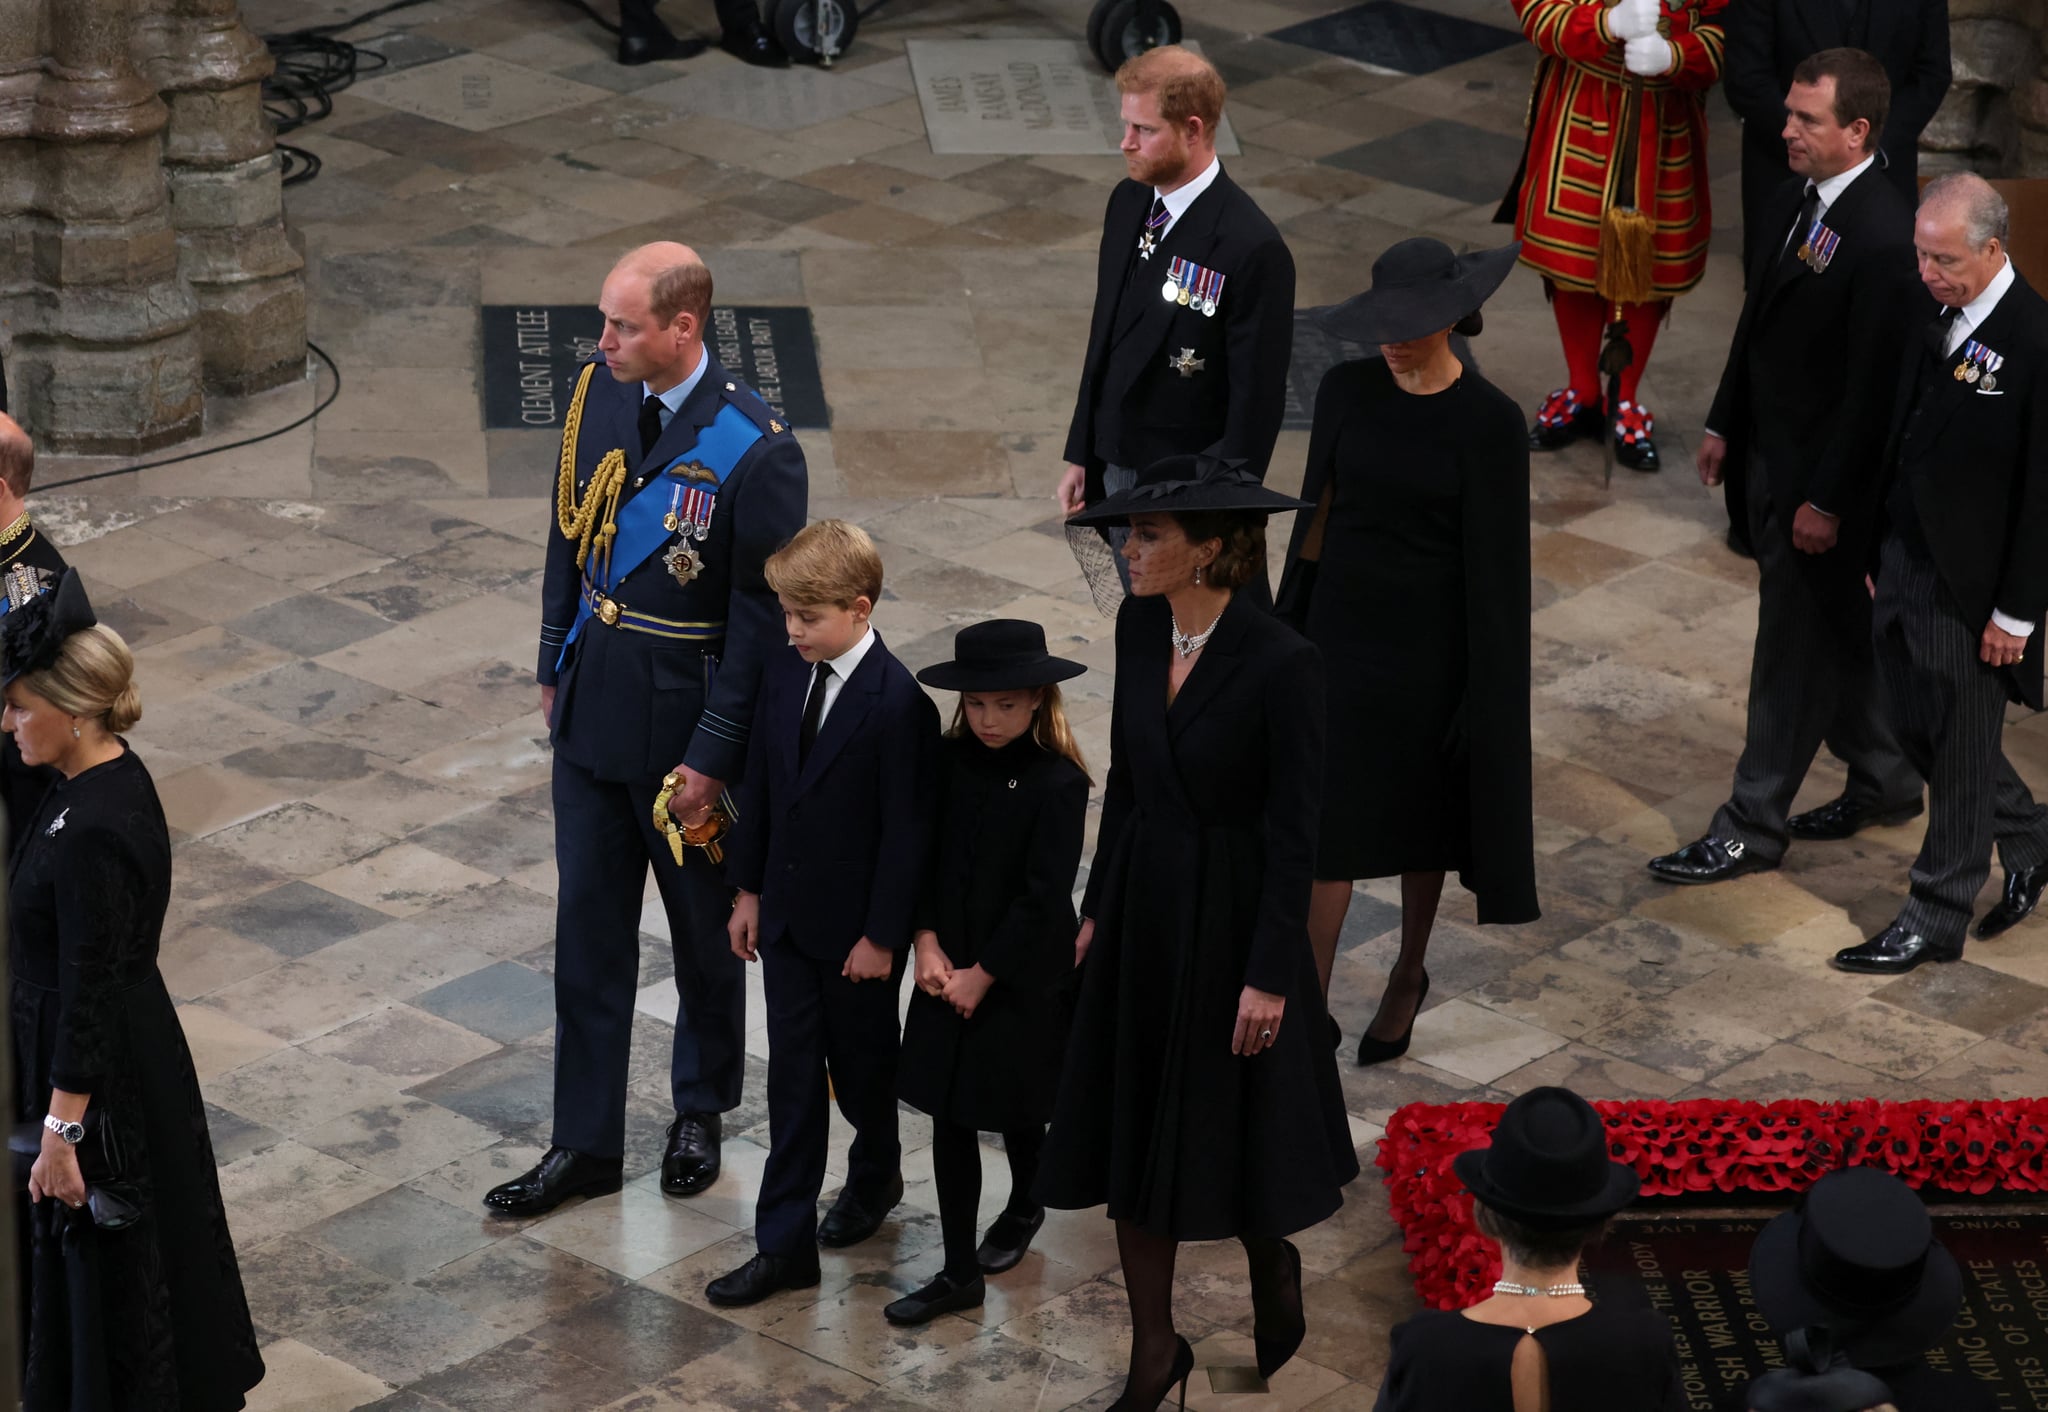 LONDON, ENGLAND - SEPTEMBER 19: Prince William, Prince of Wales, Prince George of Wales, Princess Charlotte of Wales, Catherine, Princess of Wales, Prince Harry, Duke of Sussex and Meghan, Duchess of Sussex follow the coffin of Queen Elizabeth II during the State Funeral of Queen Elizabeth II at Westminster Abbey on September 19, 2022 in London, England.  Elizabeth Alexandra Mary Windsor was born in Bruton Street, Mayfair, London on 21 April 1926. She married Prince Philip in 1947 and ascended the throne of the United Kingdom and Commonwealth on 6 February 1952 after the death of her Father, King George VI. Queen Elizabeth II died at Balmoral Castle in Scotland on September 8, 2022, and is succeeded by her eldest son, King Charles III. (Photo by Phil Noble - WPA Pool/Getty Images)